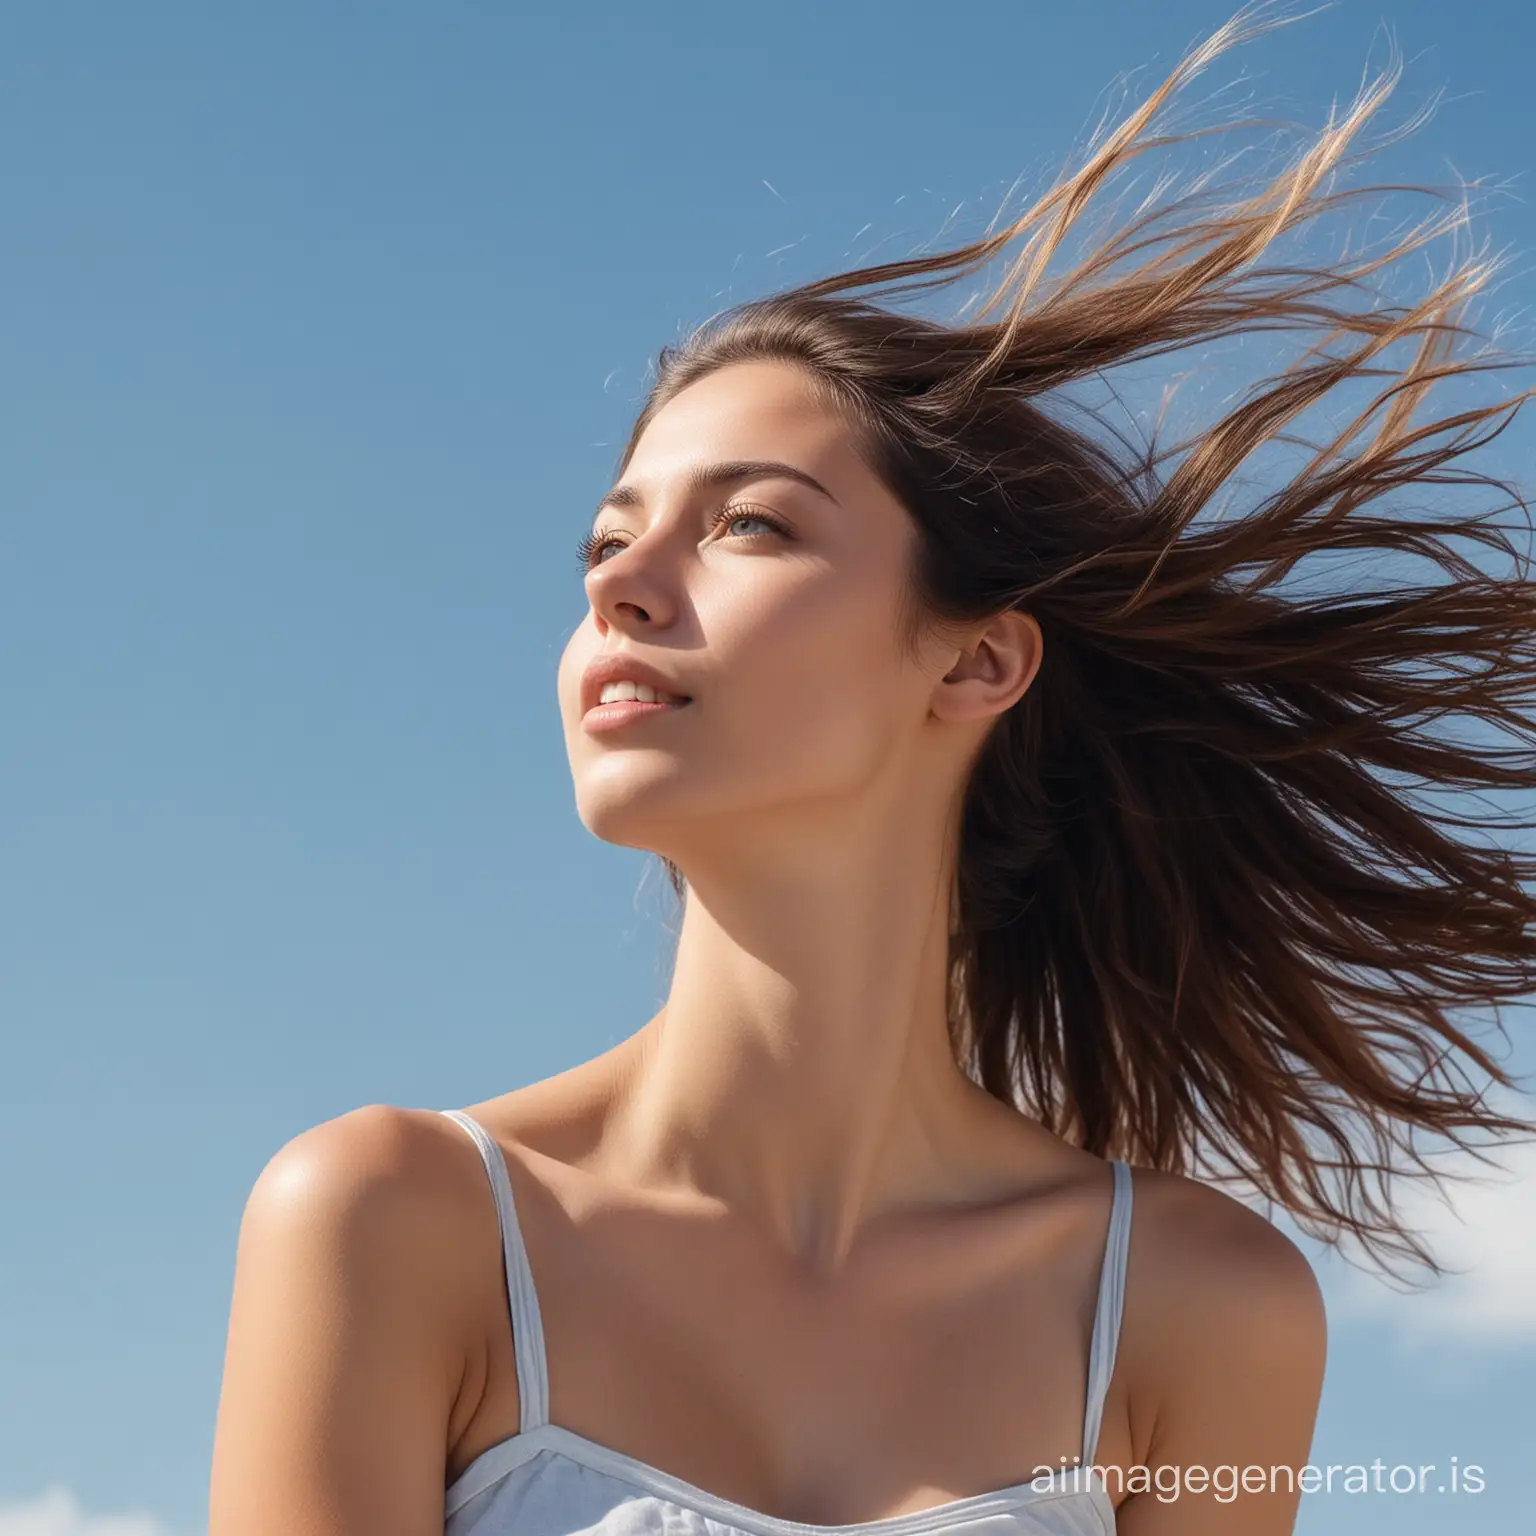 young woman 25 years old, her face calm and thoughtful, hair gathered, no clothes on her shoulders, she poses, she looks to the right and reaches out to take, behind her is a blue clear sky